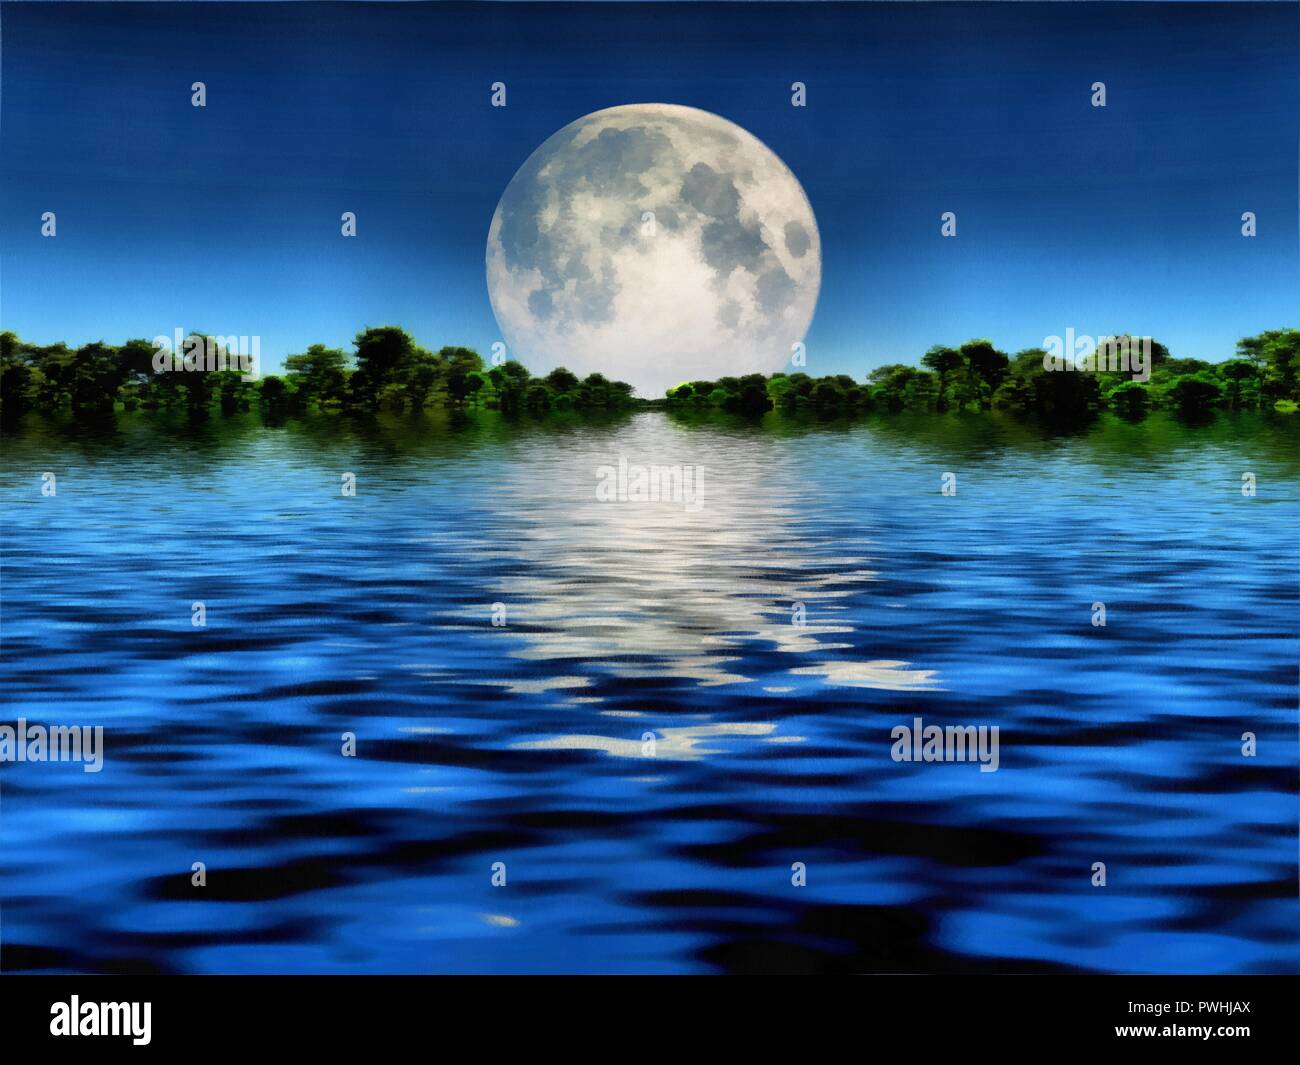 Surreal Painting Big Moon Over Water Forest At The Horizon Stock Photo Alamy